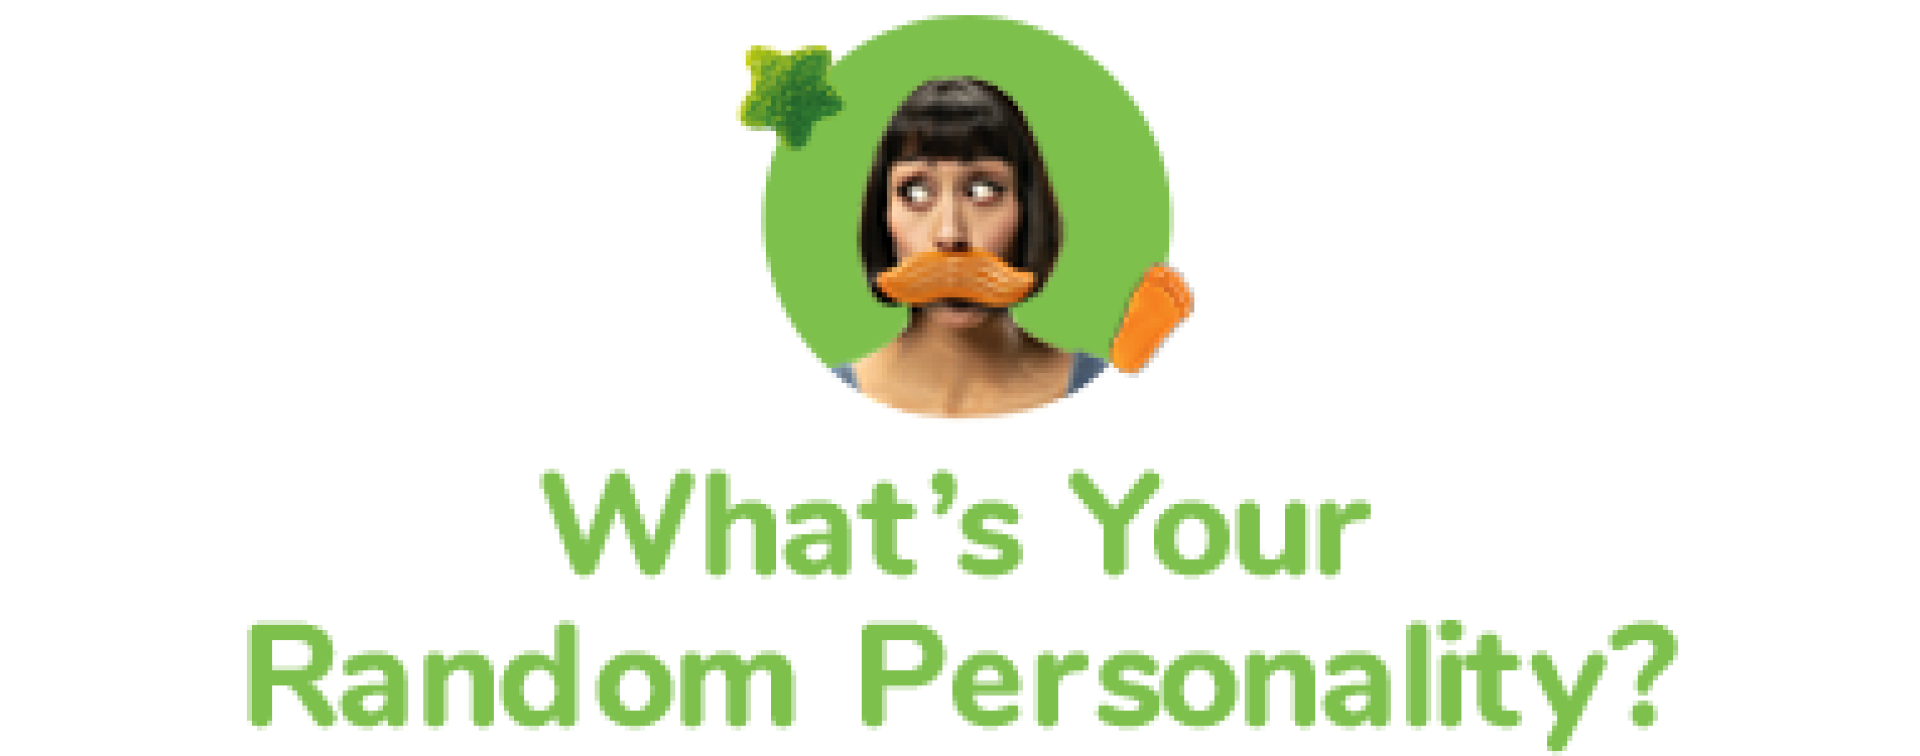 whats youre random personality